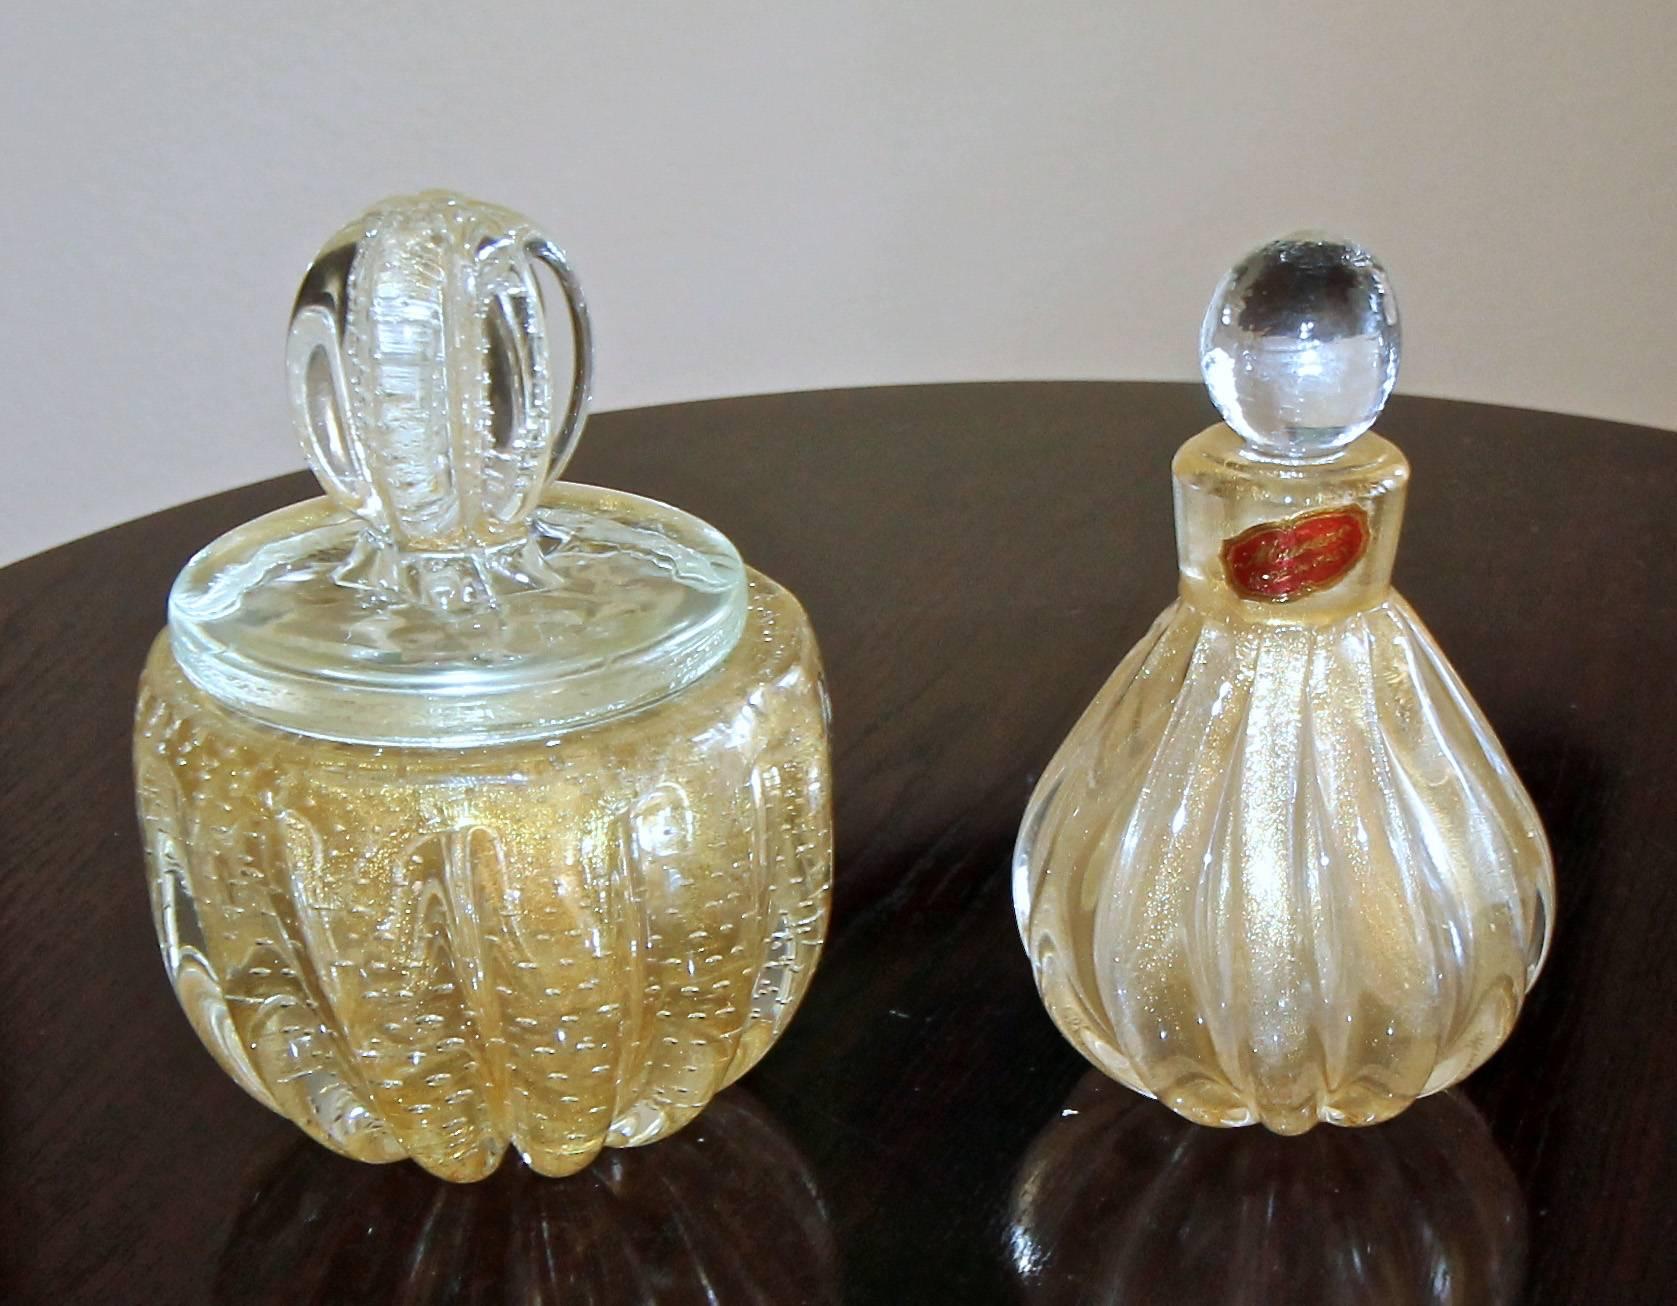 Murano glass perfume bottle and lidded powder jar, each with gold inclusions and controlled bubbles.
Measures: size perfume bottle 5.5" tall x 3.5" wide, powder jar 6" tall x 4" wide.